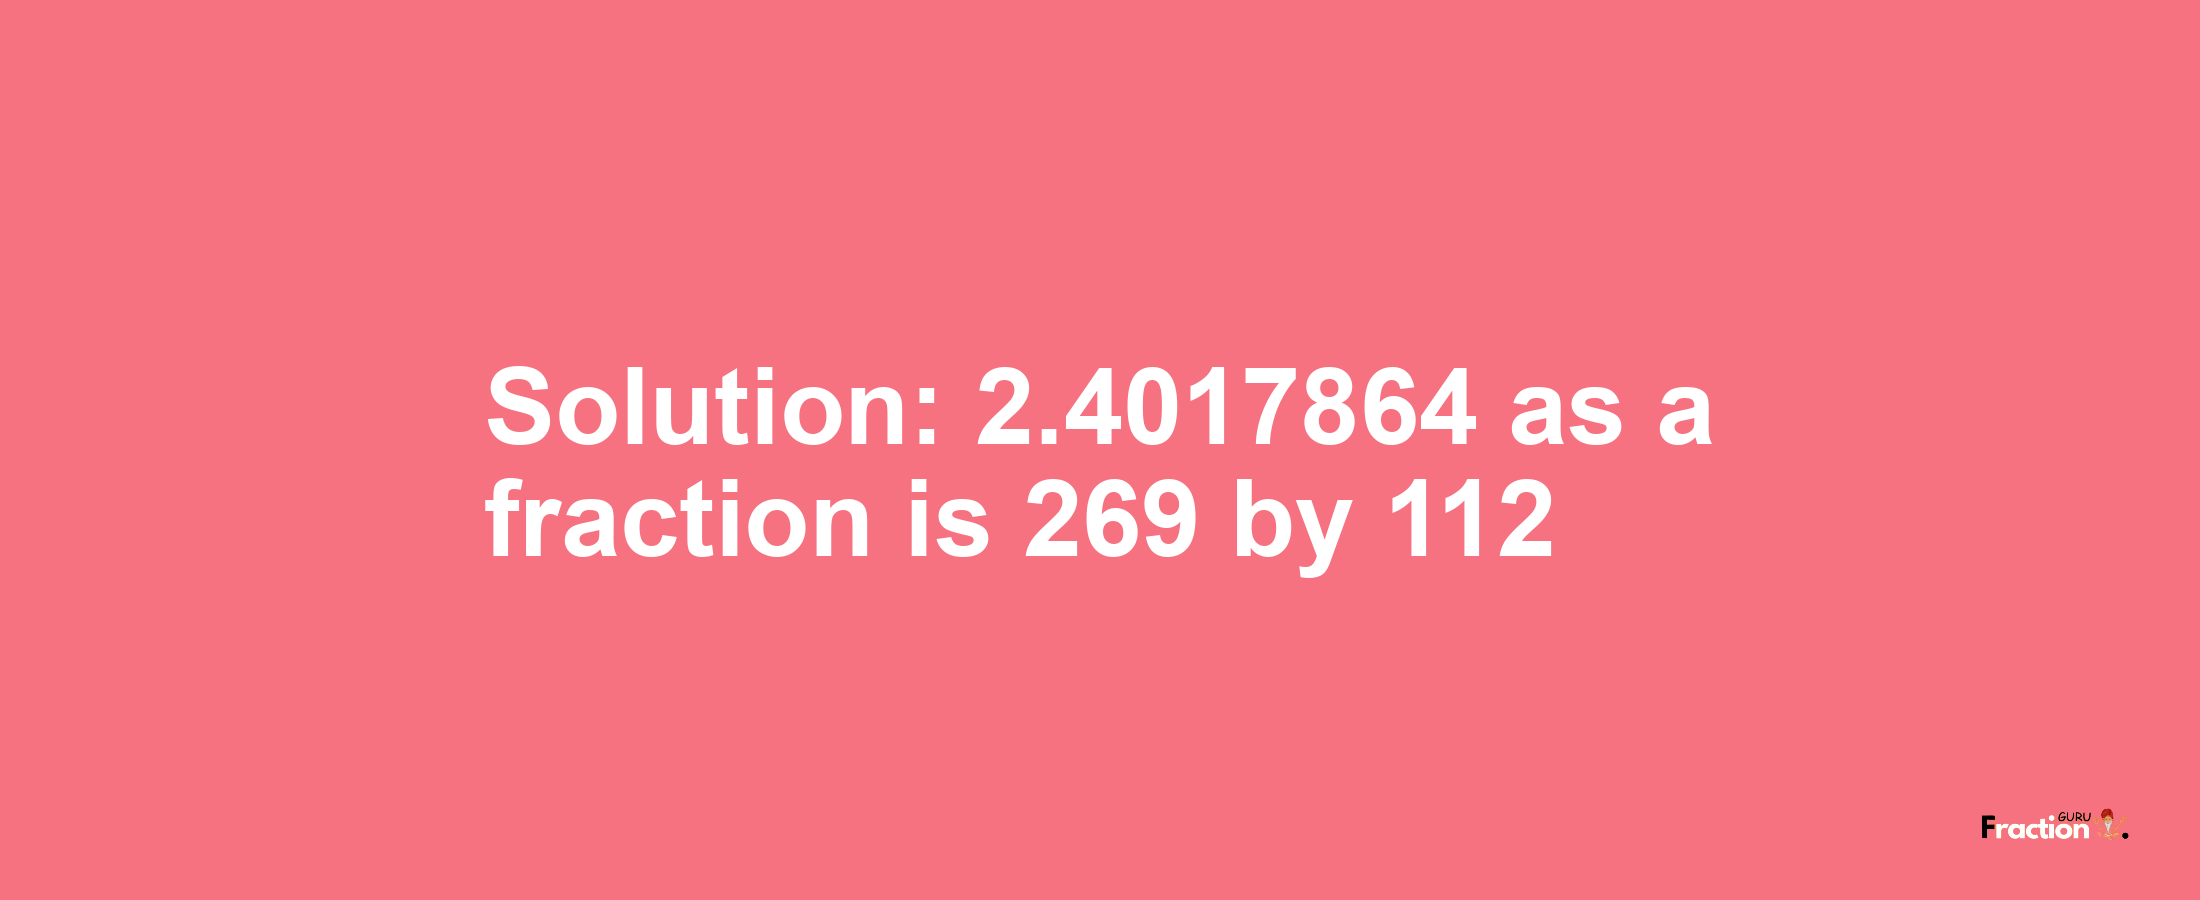 Solution:2.4017864 as a fraction is 269/112